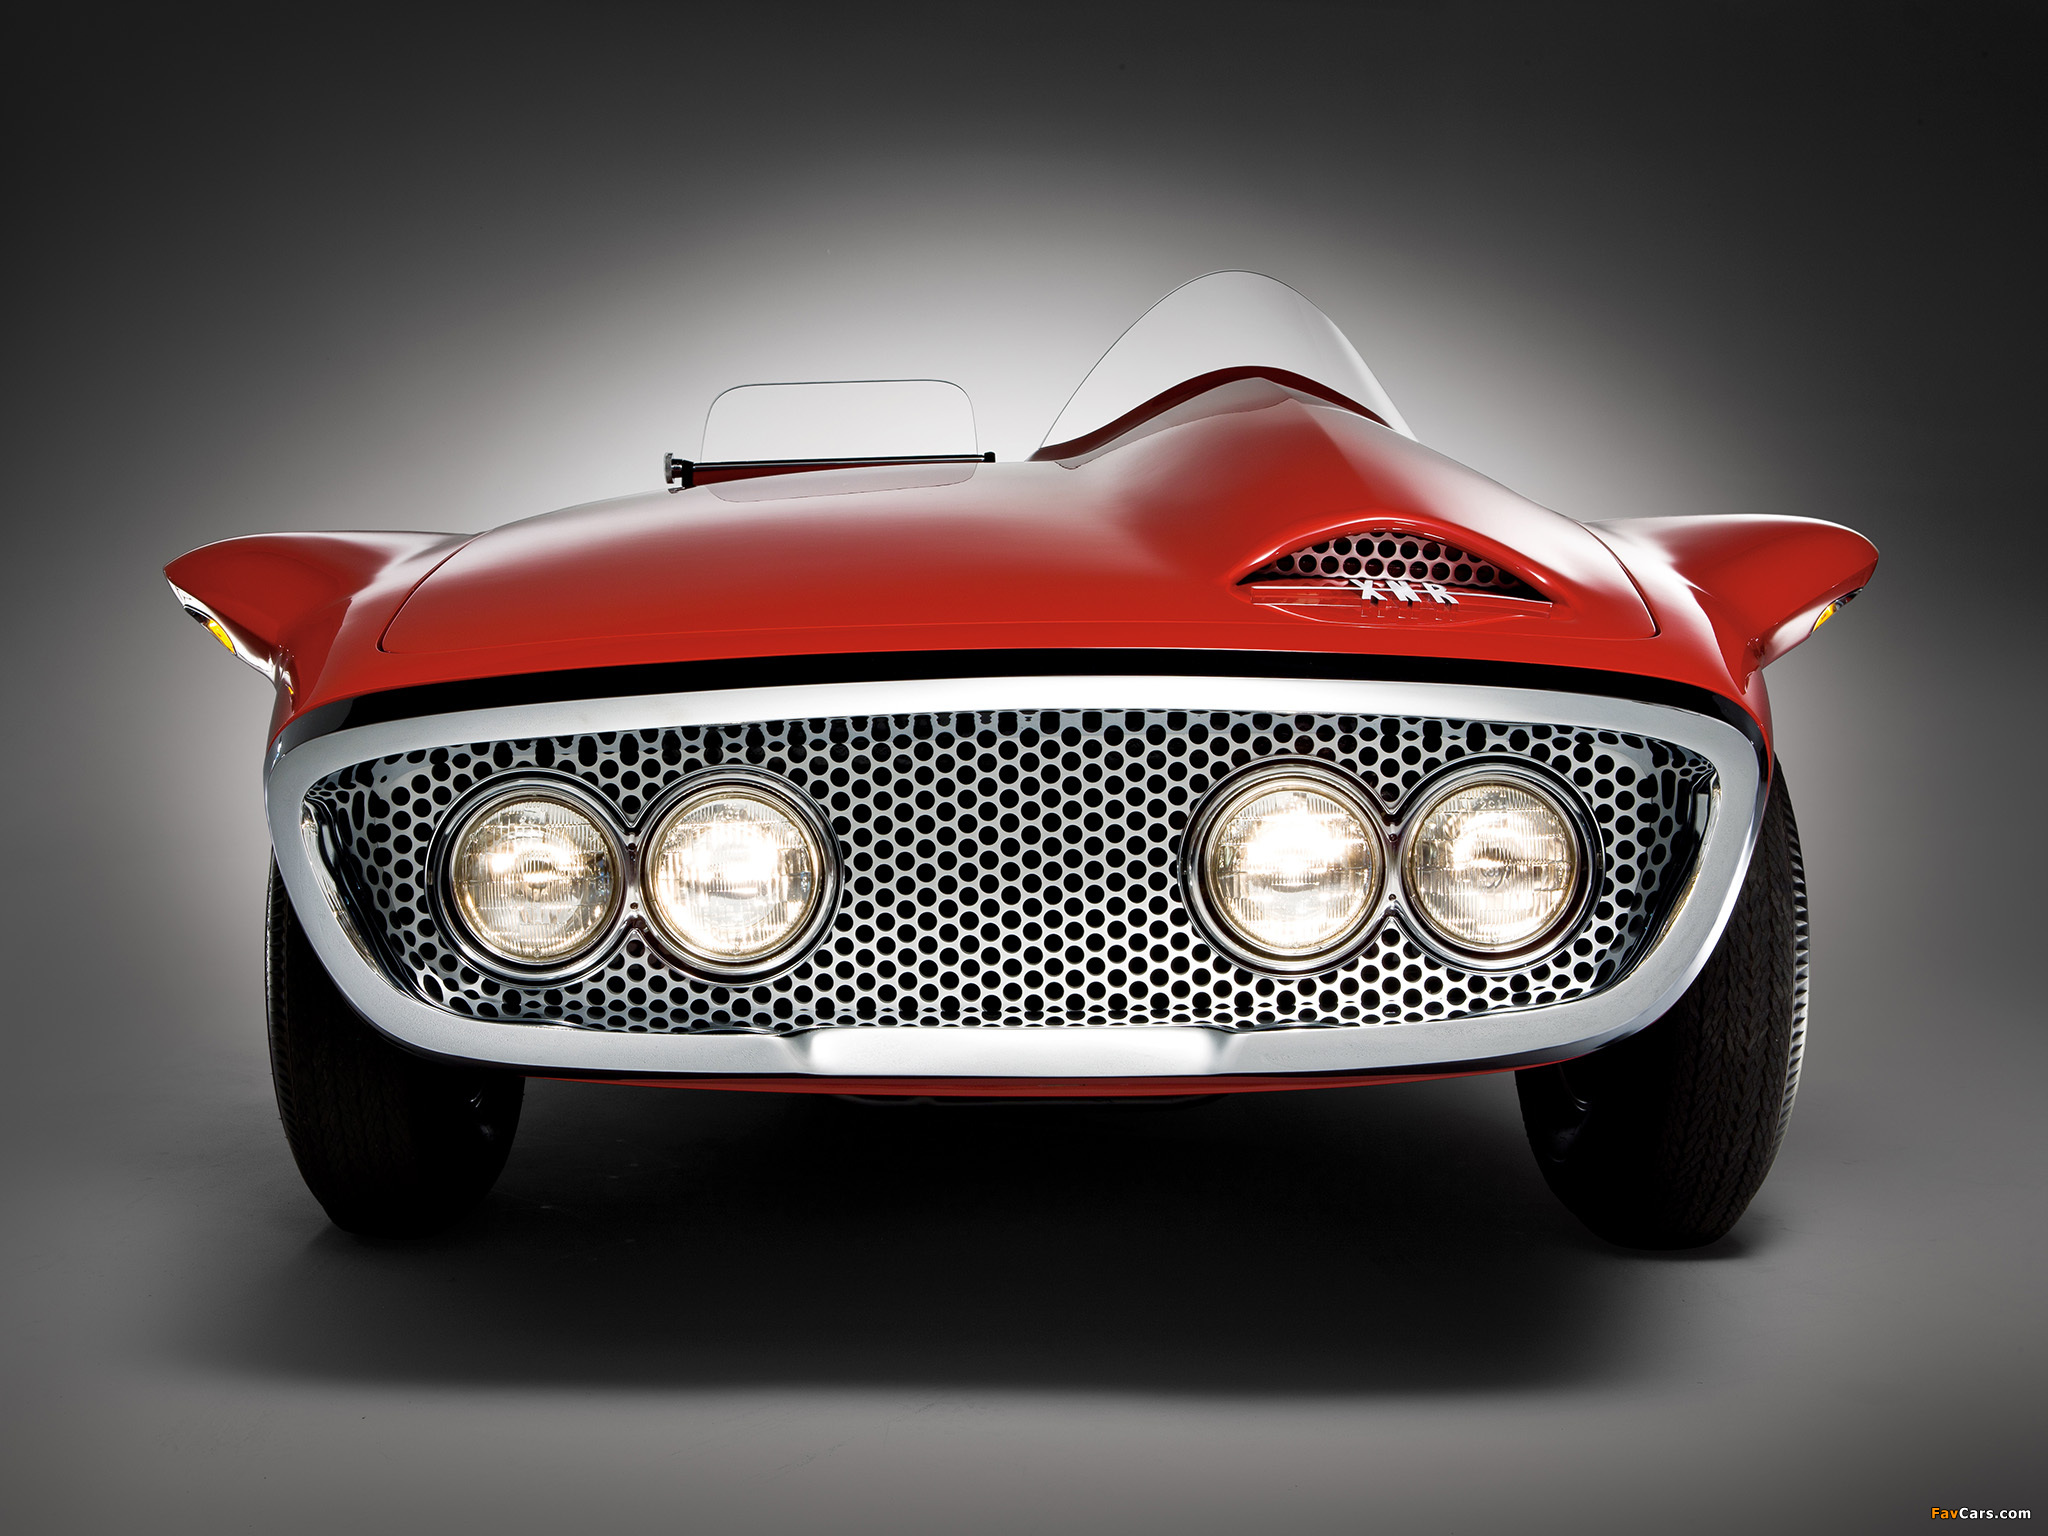 Plymouth XNR Concept Car 1960 pictures (2048 x 1536)